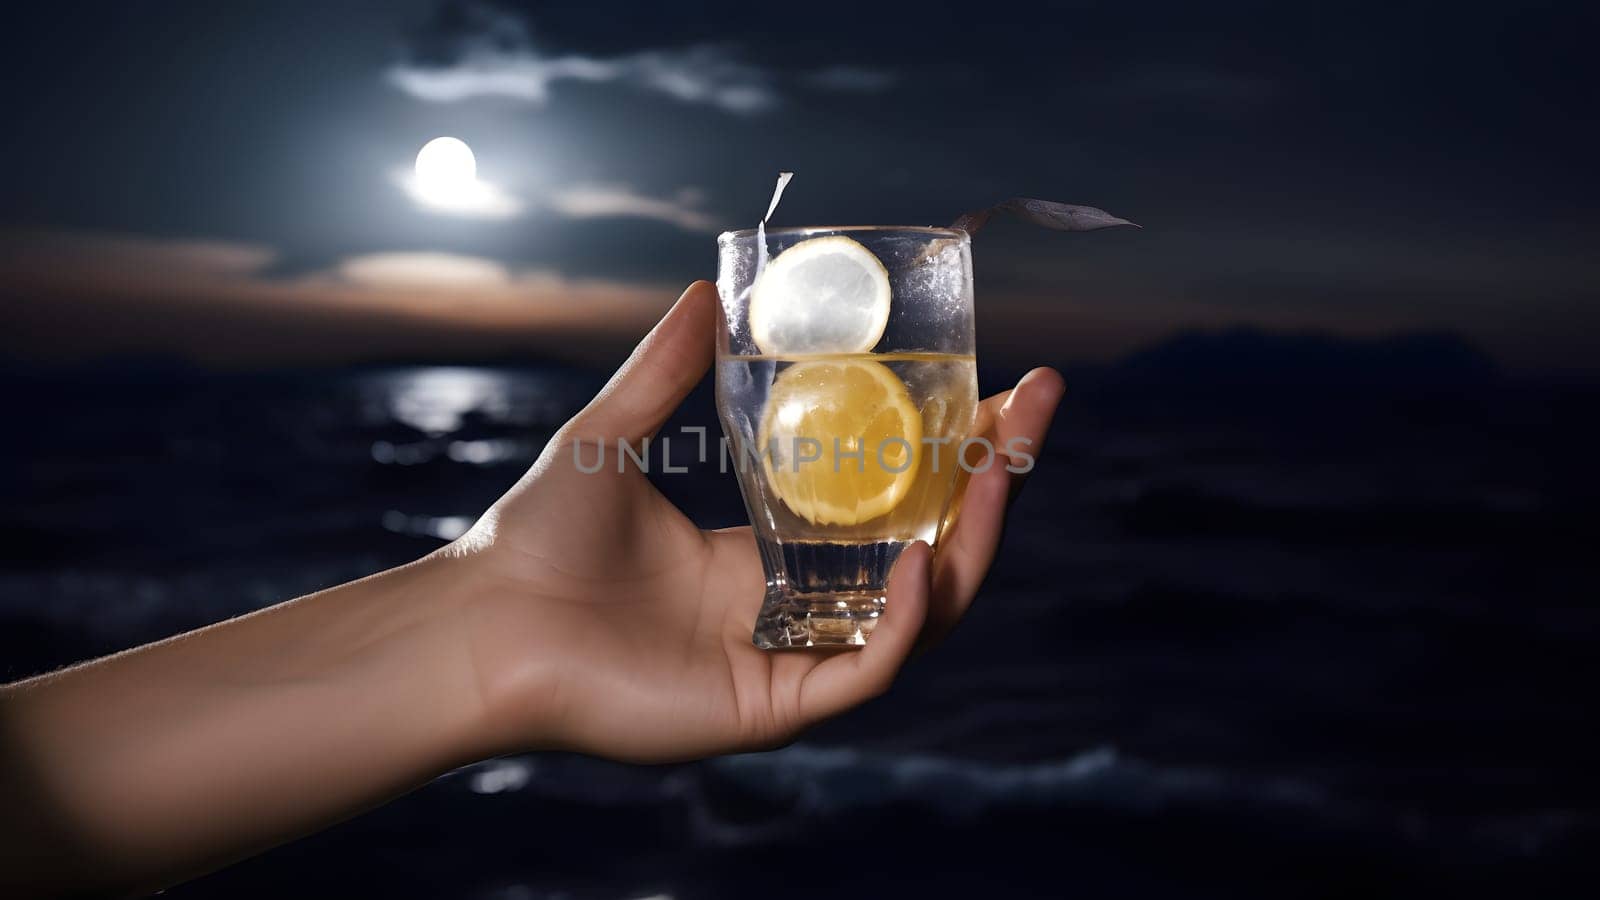 white woman hand holding glass of cocktail on blurry sea horizon background at full moon night, neural network generated image by z1b